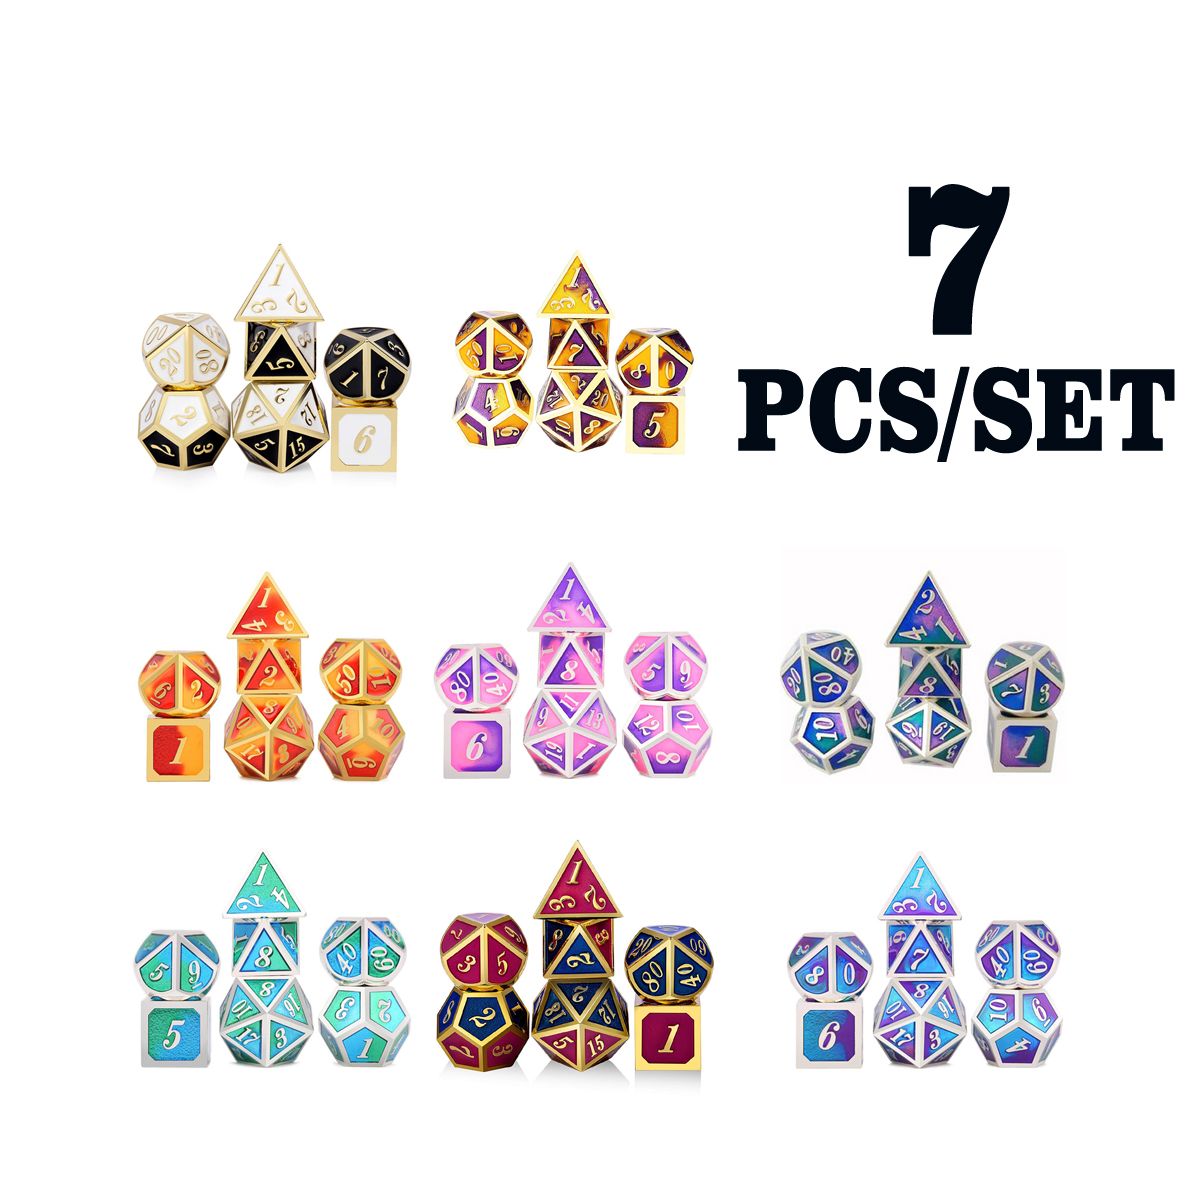 7PCSSET-Creative-Metal-Multi-faced-Dice-Set-Heavy-Duty-Polyhedral-Dices-Role-Playing-Game-Party-Game-1584212